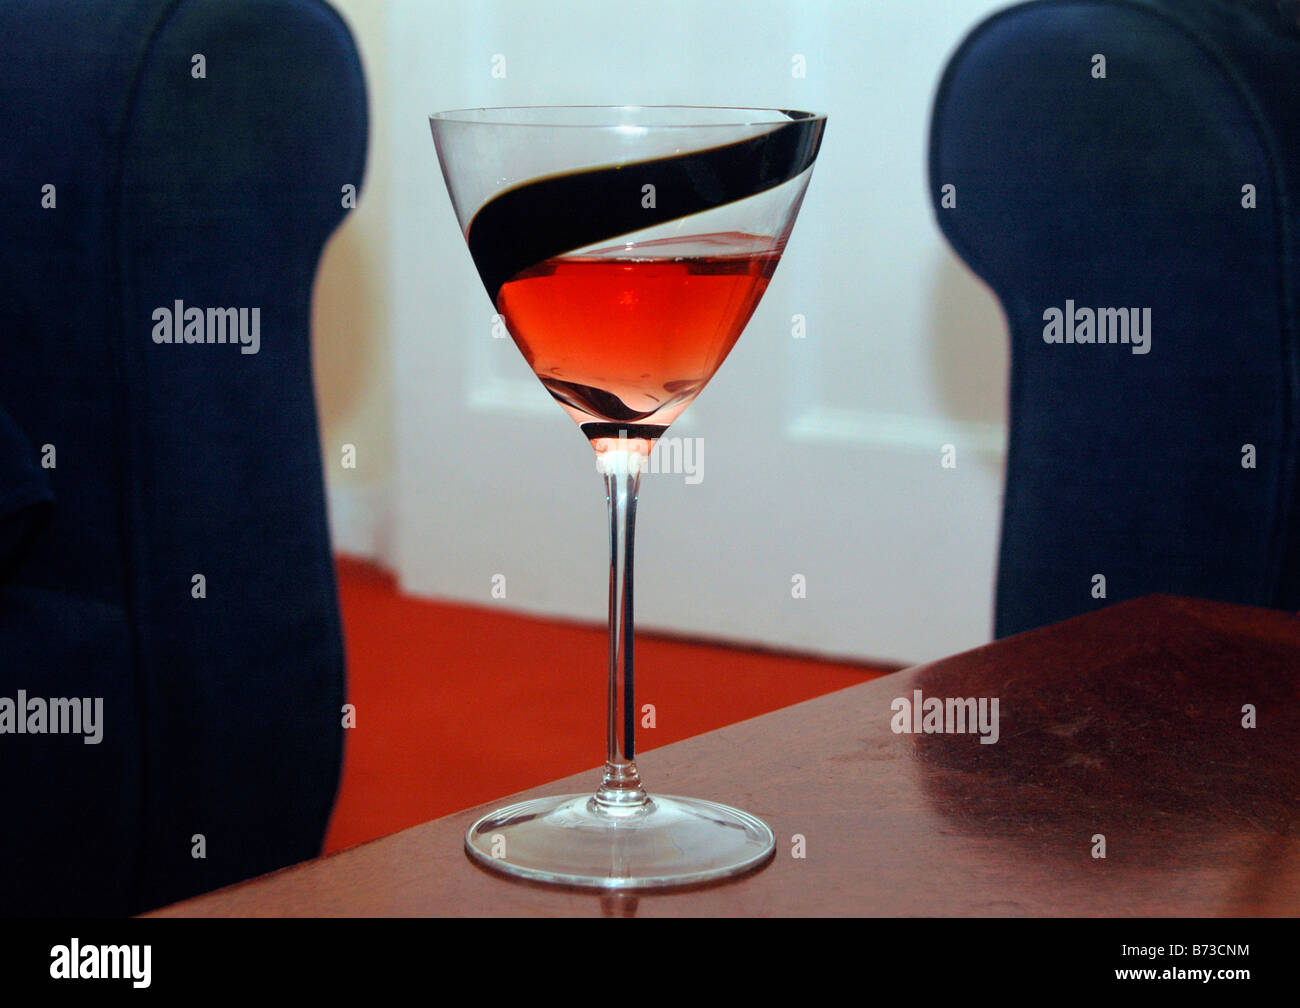 A glass of rose wine sits on a table framed by 2 armchairs. Stock Photo